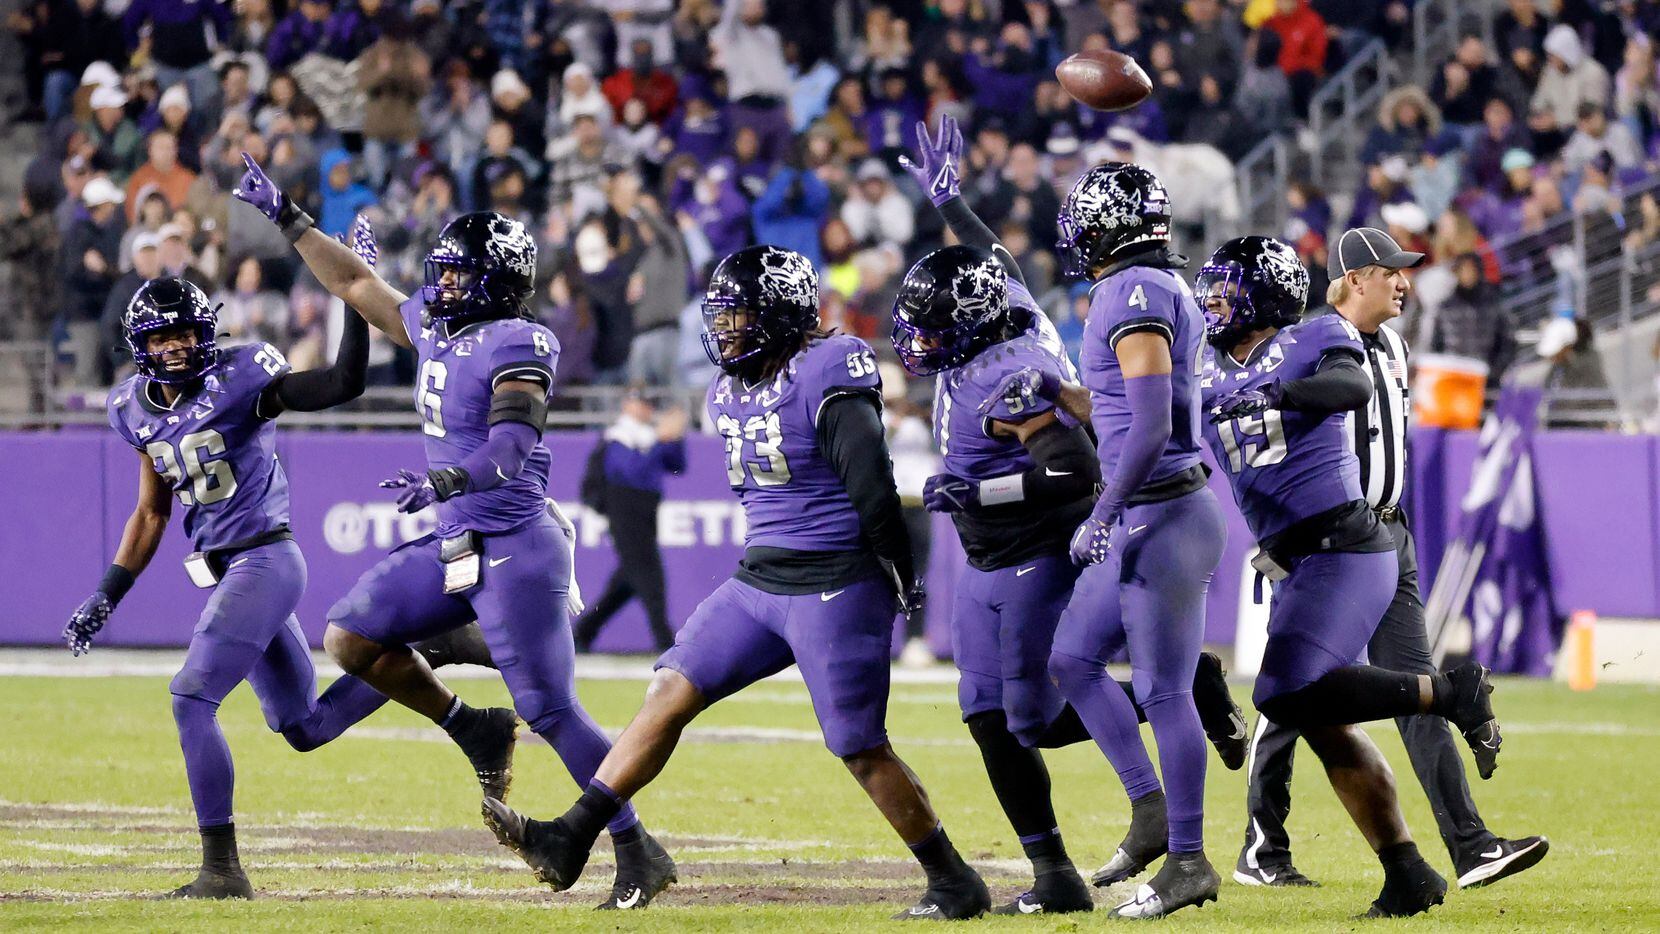 The TCU Horned Frogs defense celebrates a third quarter fumble recovery against the Iowa...